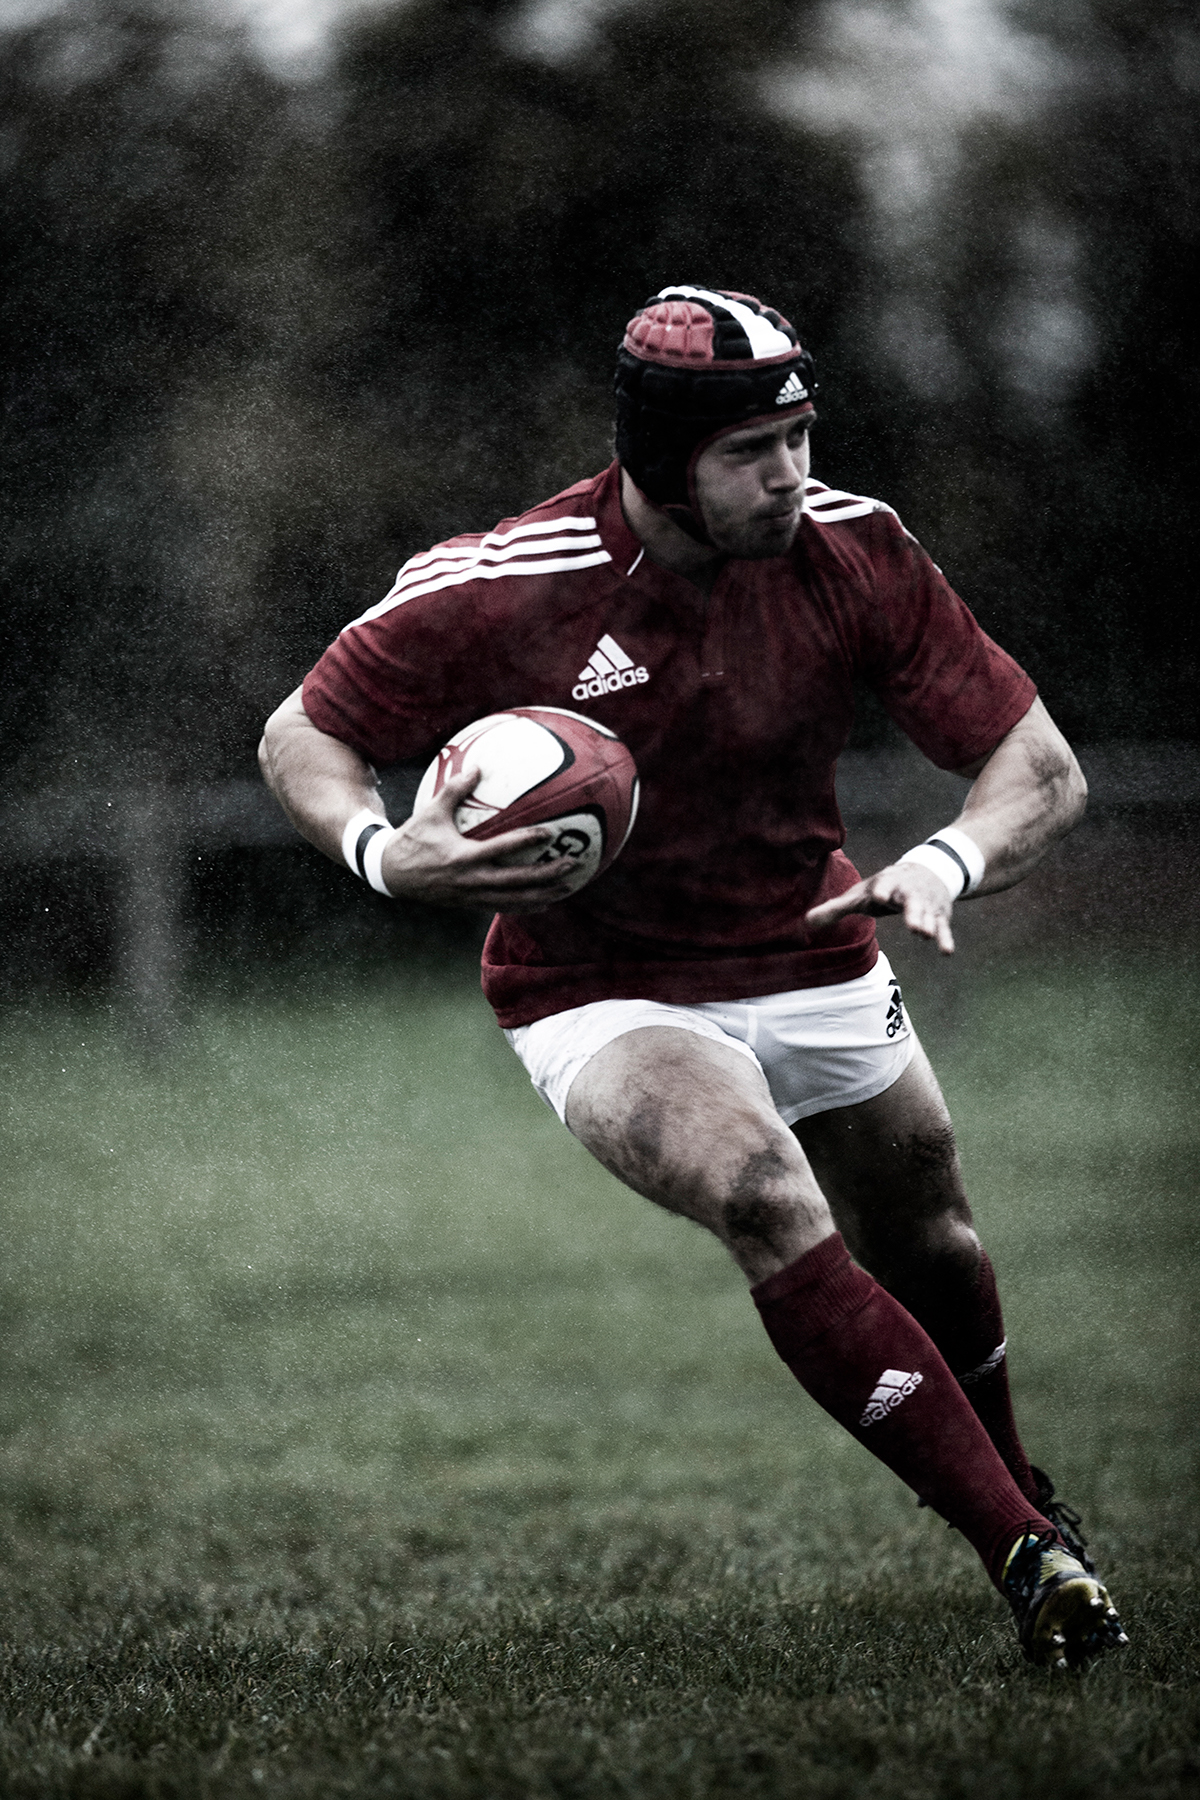 Lucozade Lucozade Sport sport Sport Photography action photography Rugby